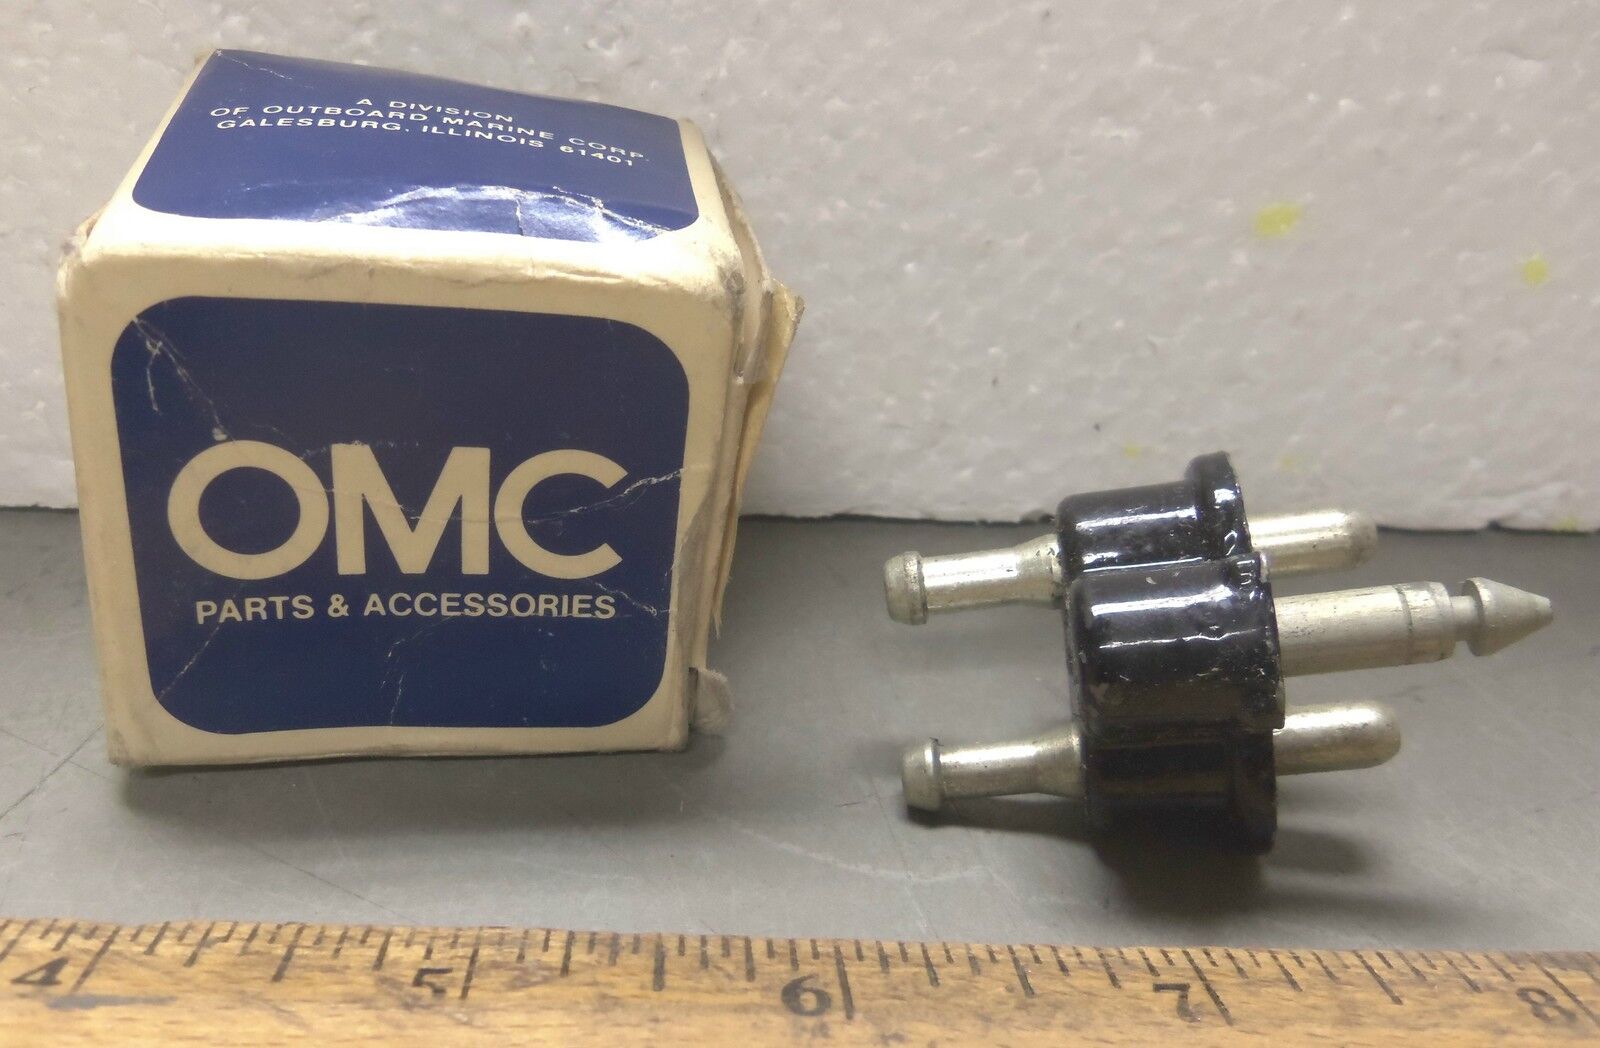 Vintage Outboard Marine - Fuel Connector Body Assembly – OMC P/N: 375788 (NOS)